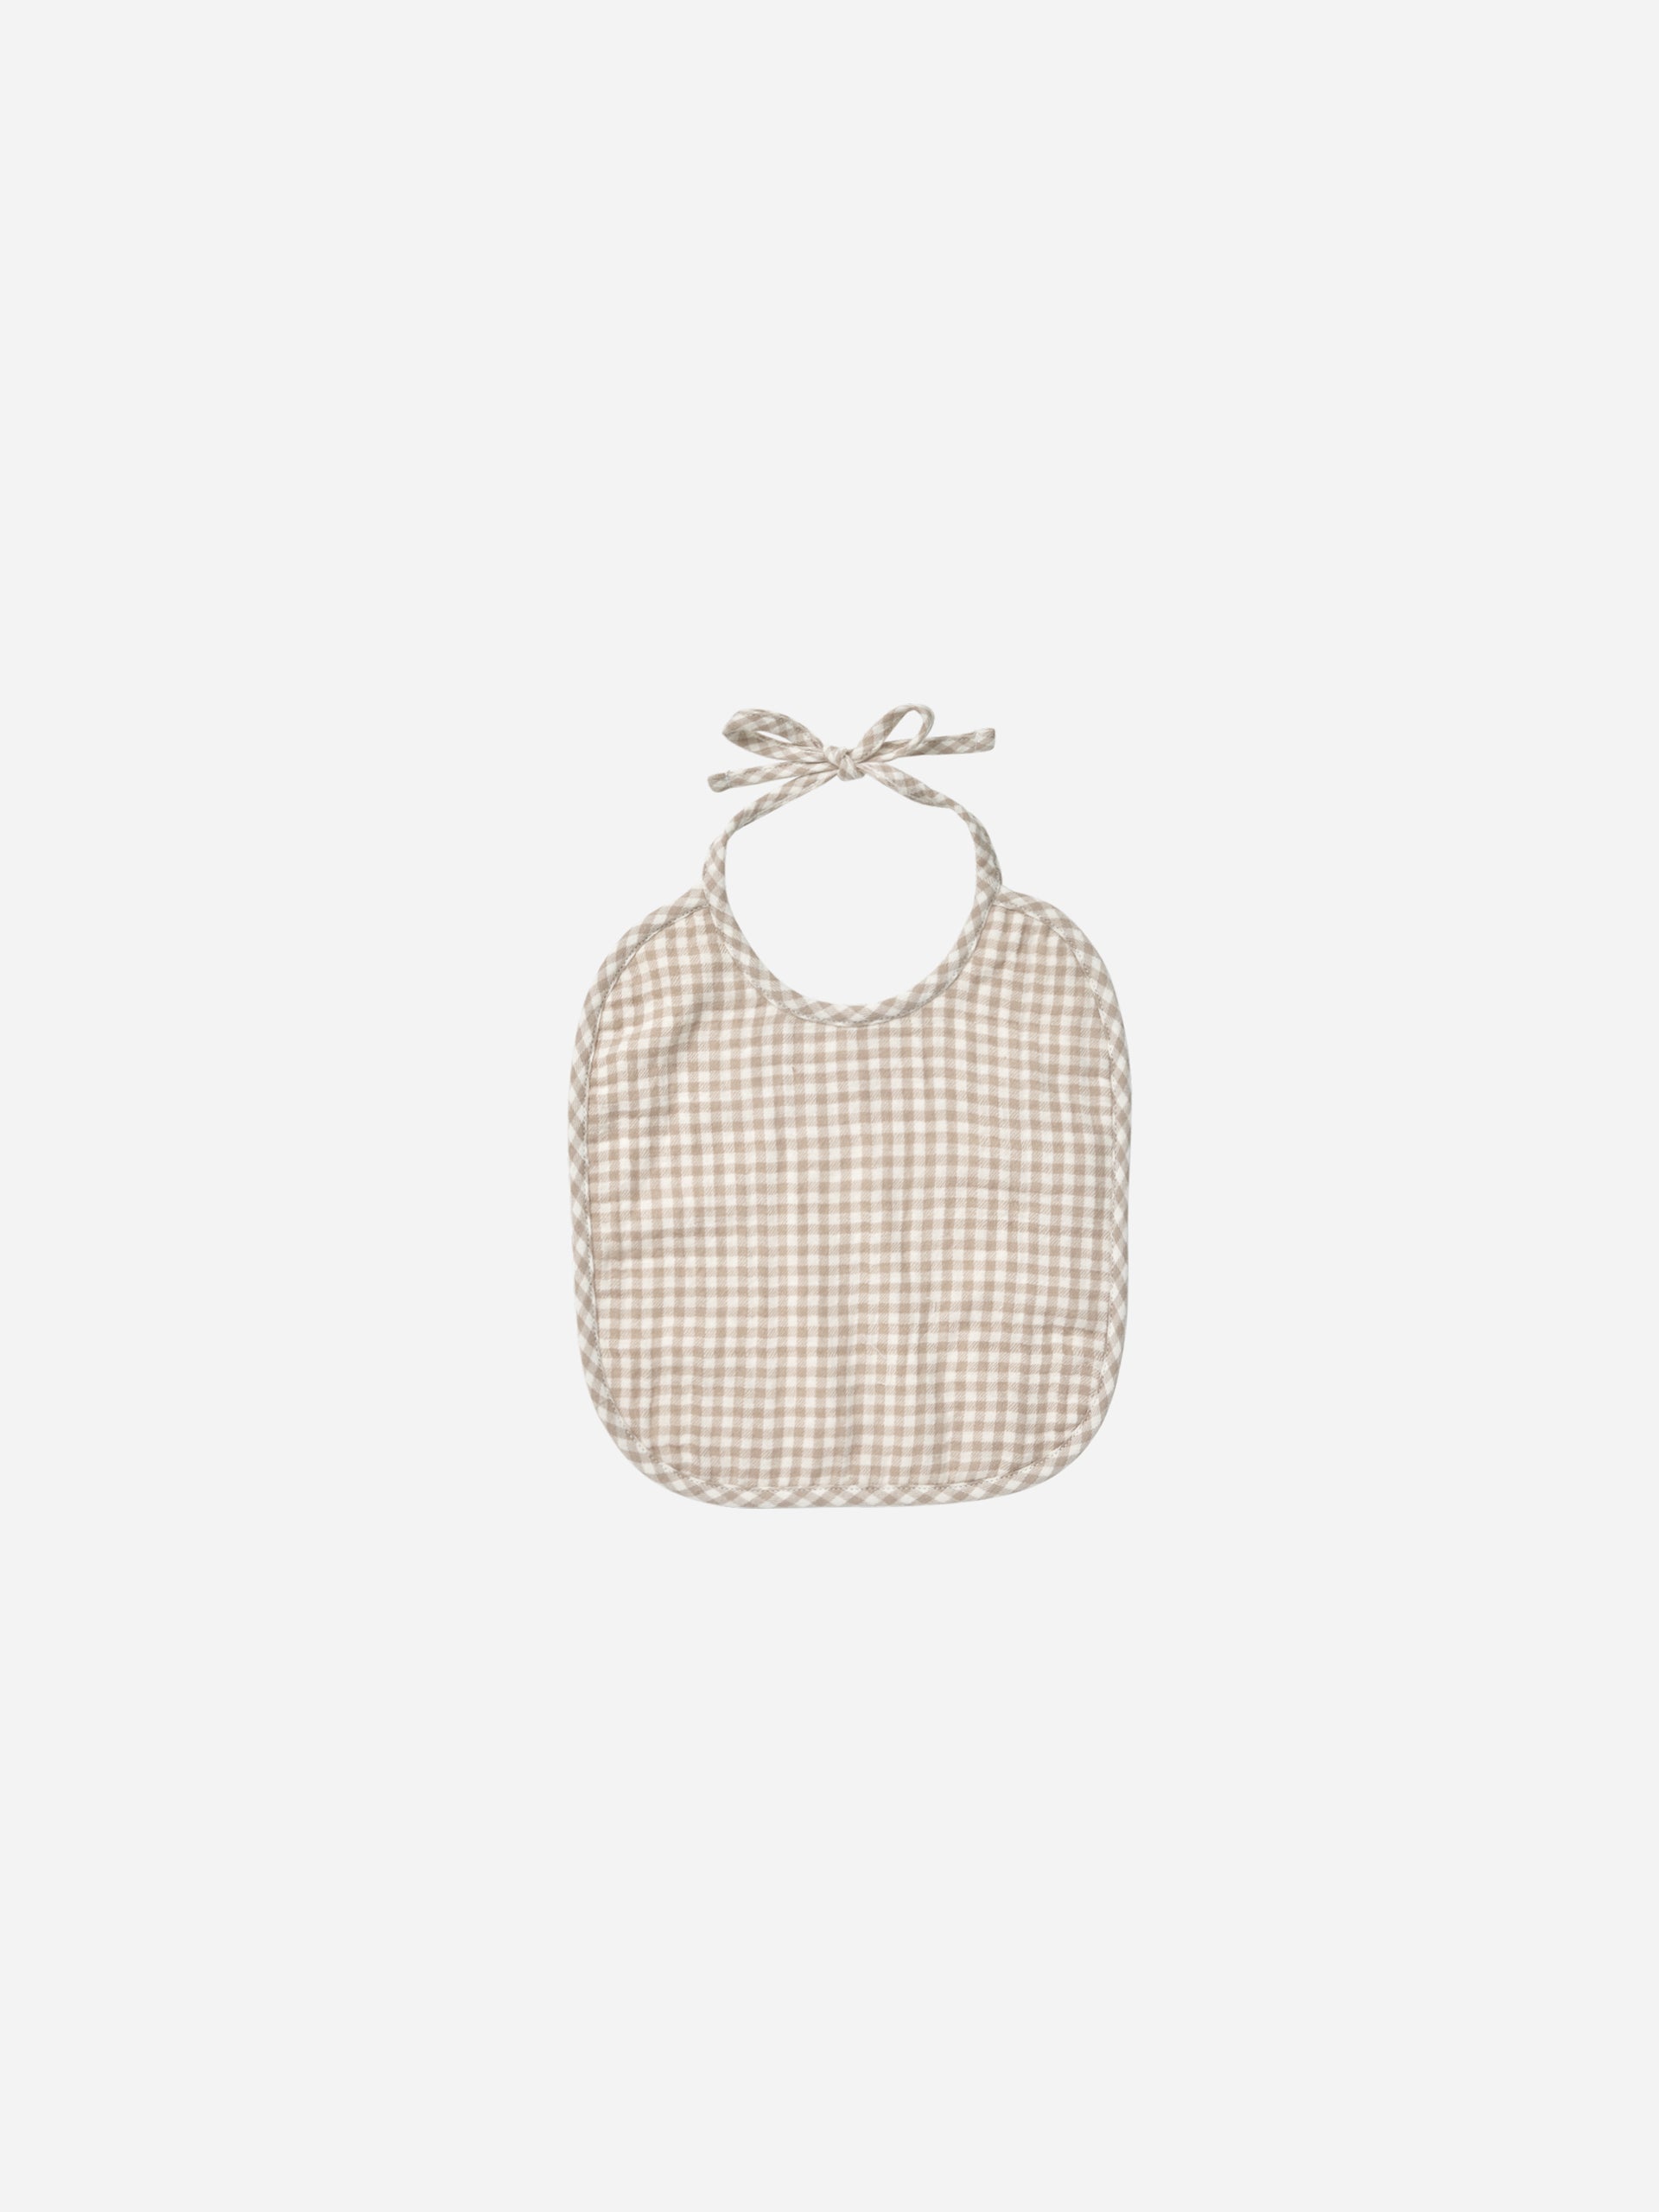 Woven Tie Bib || Oat Gingham - Rylee + Cru | Kids Clothes | Trendy Baby Clothes | Modern Infant Outfits |